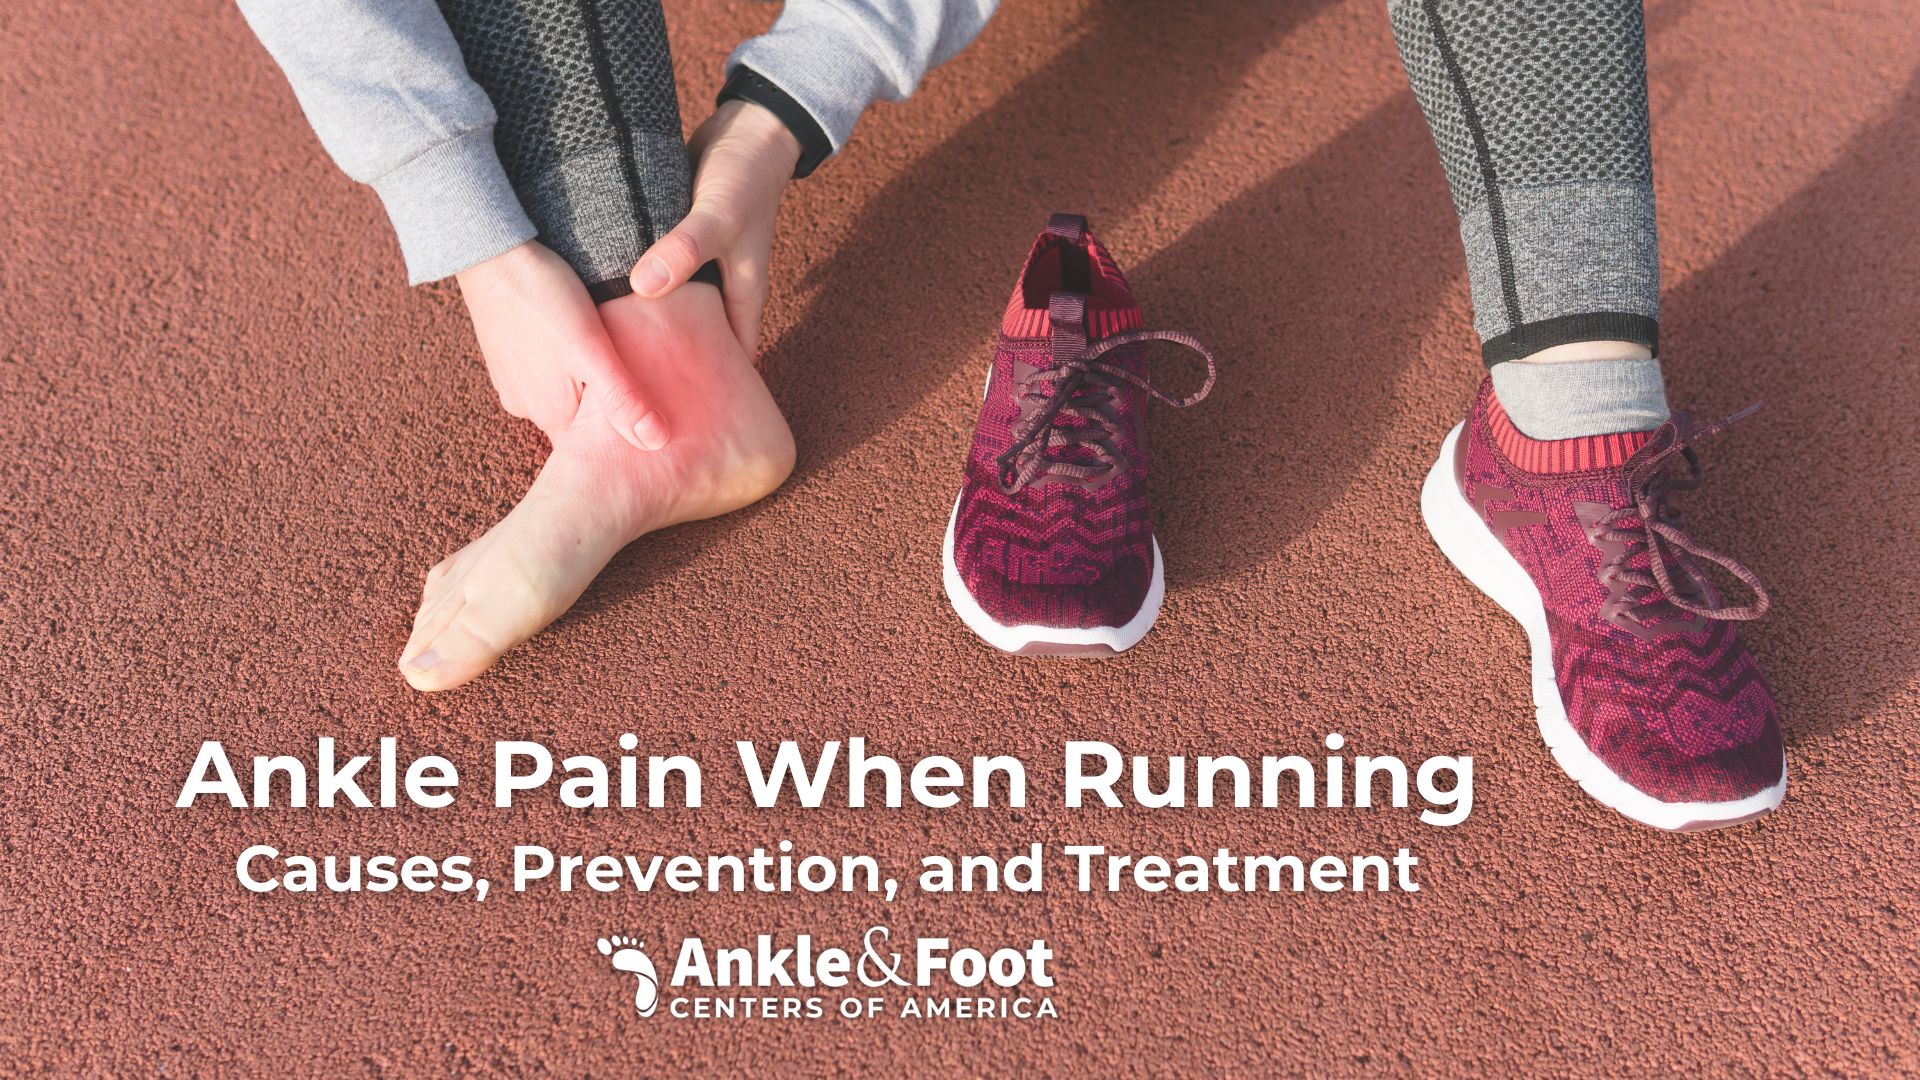 Shoes that Worsen Foot Pain: The Foot & Ankle Specialists: Podiatric  Medicine